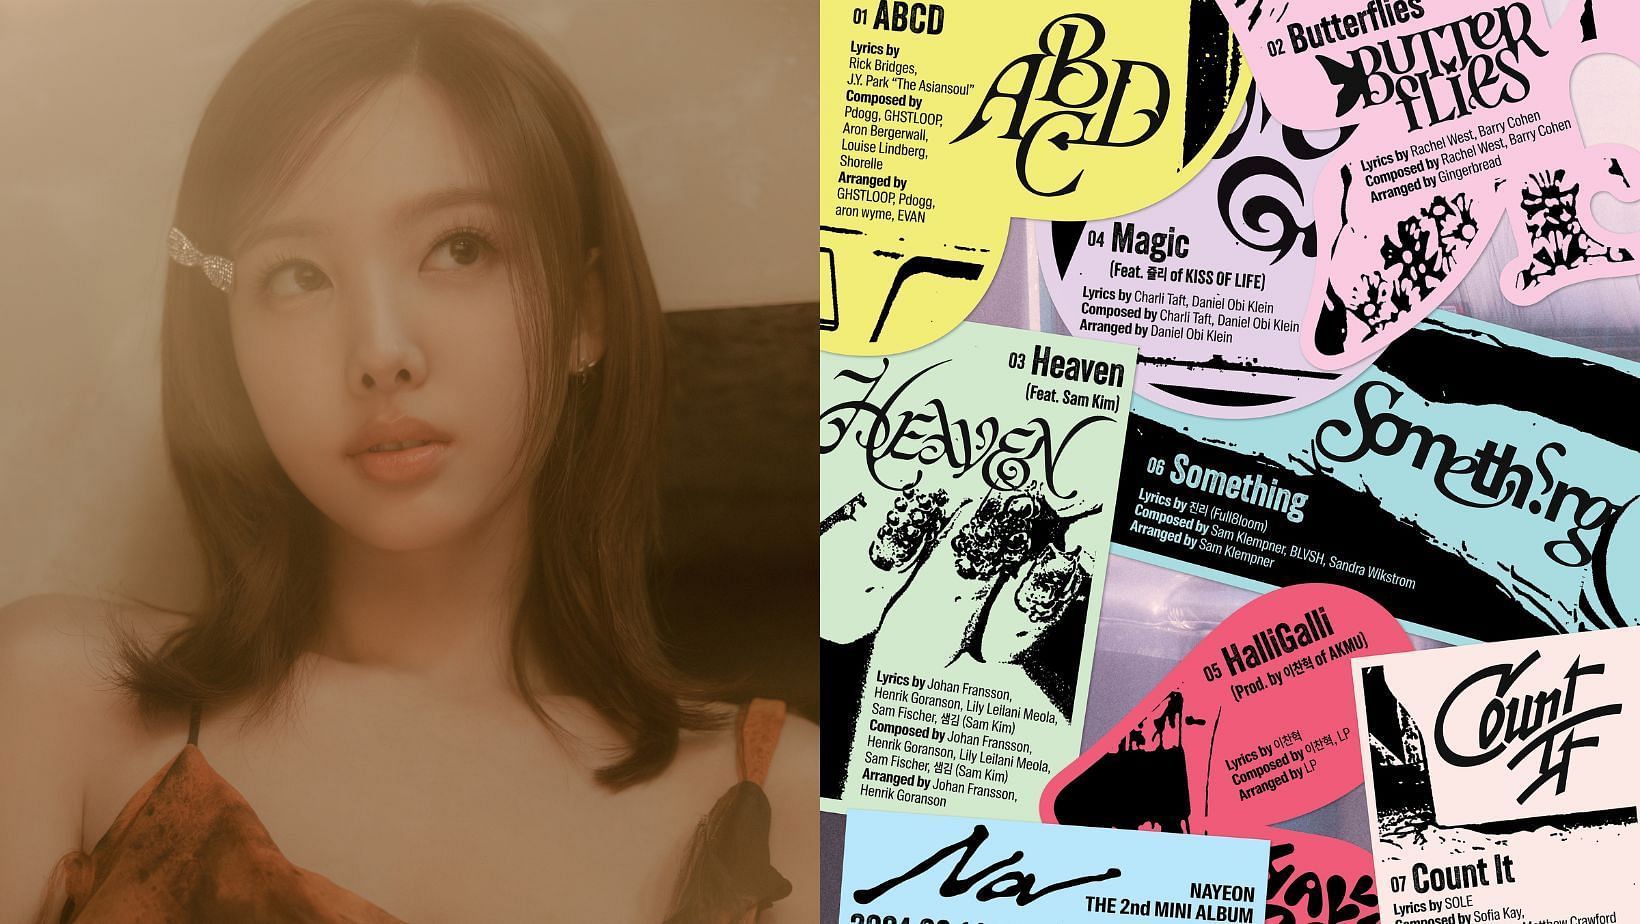 TWICE Nayeon reveals the tracklist for her upcoming mini album &lsquo;NA&rsquo;. (Images via X/@JYPETWICE)